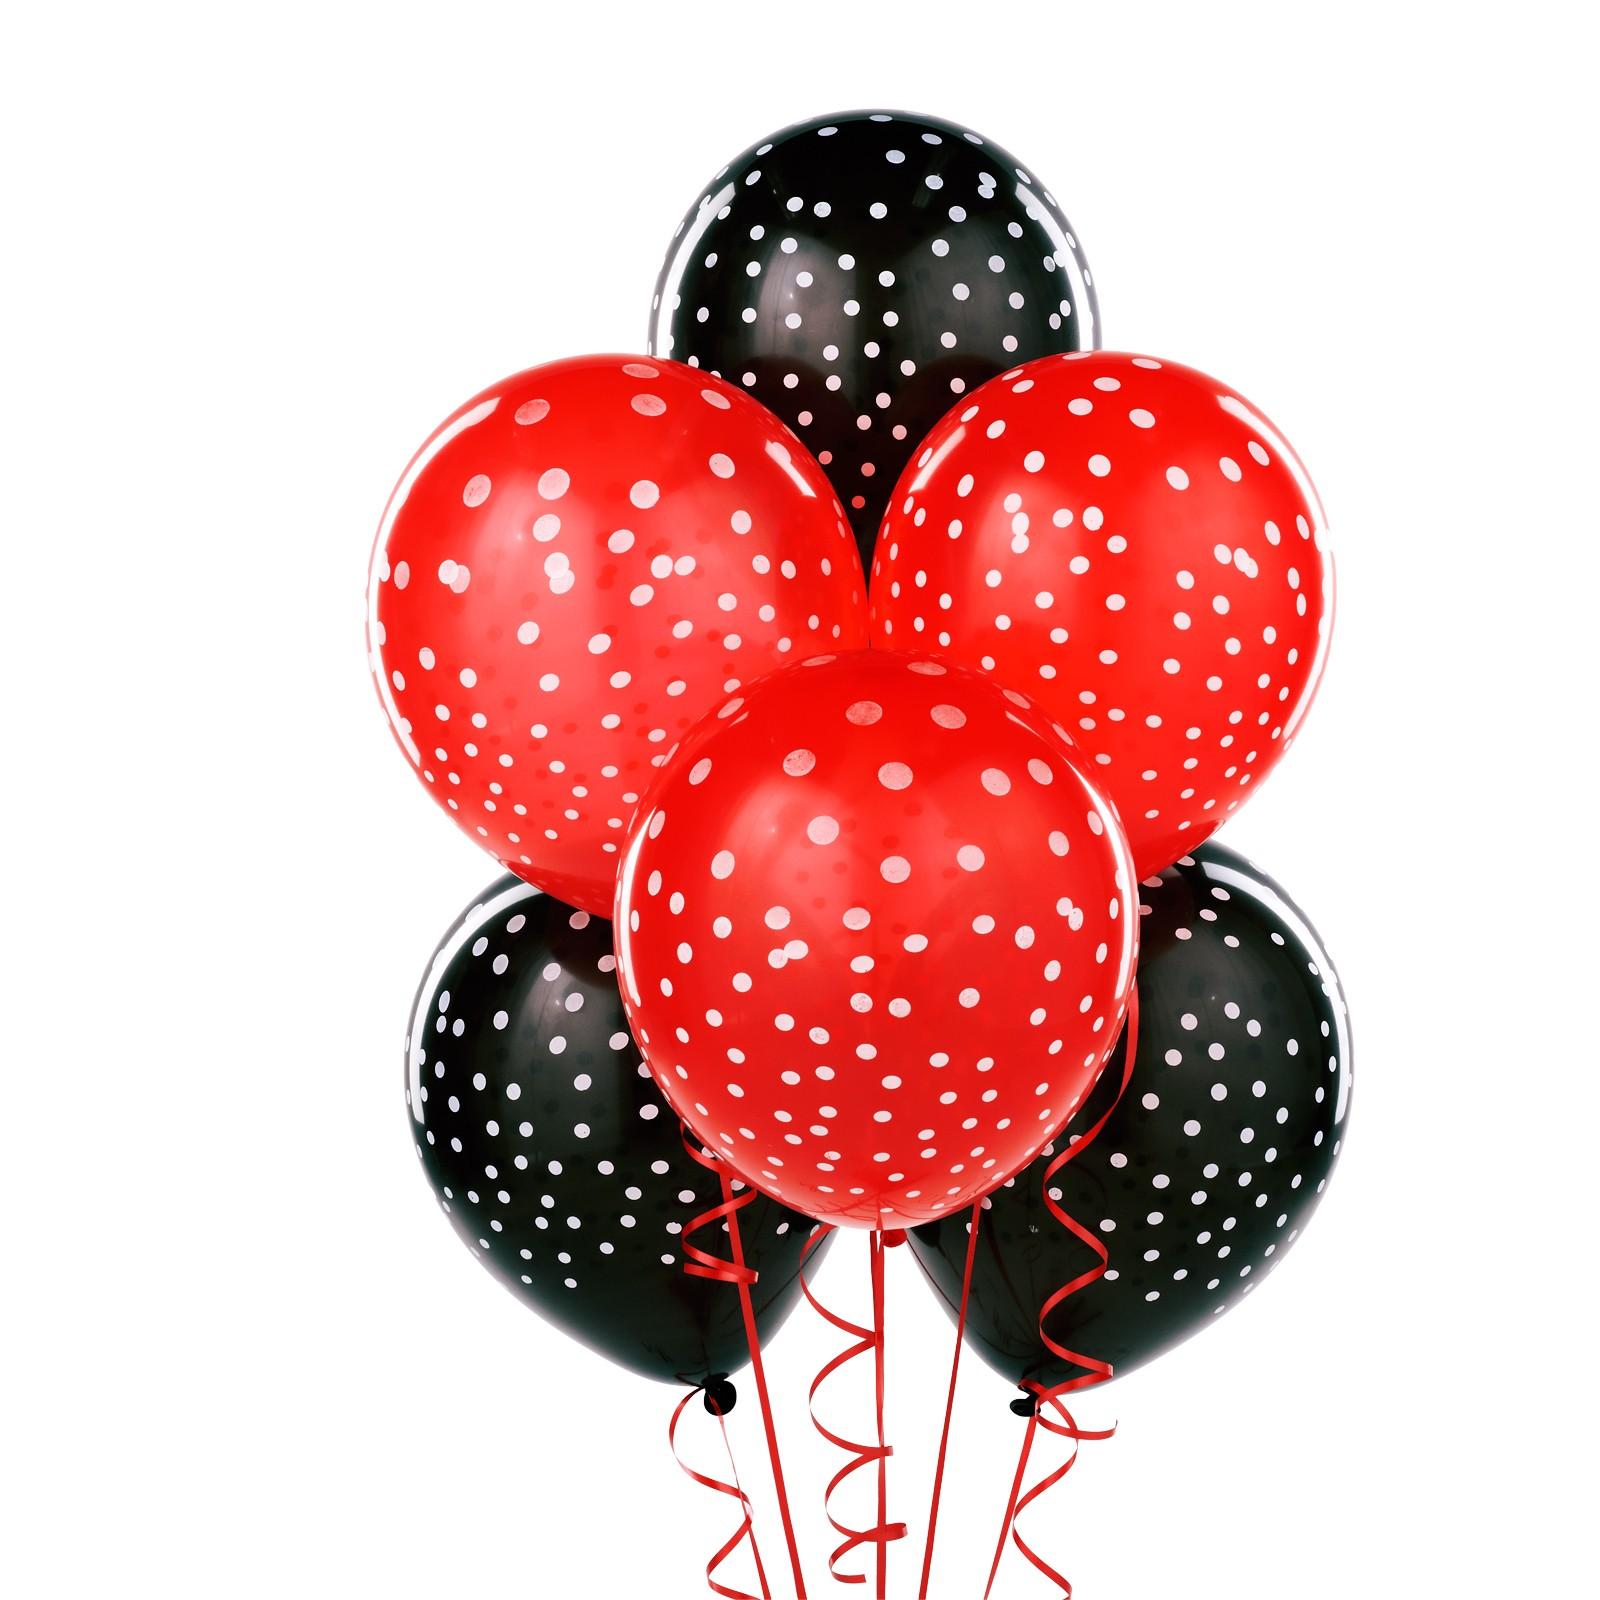 Printed Polka Dot Latex Balloons: Ladybug First Birthday Party Decorations for Your Little Lady!